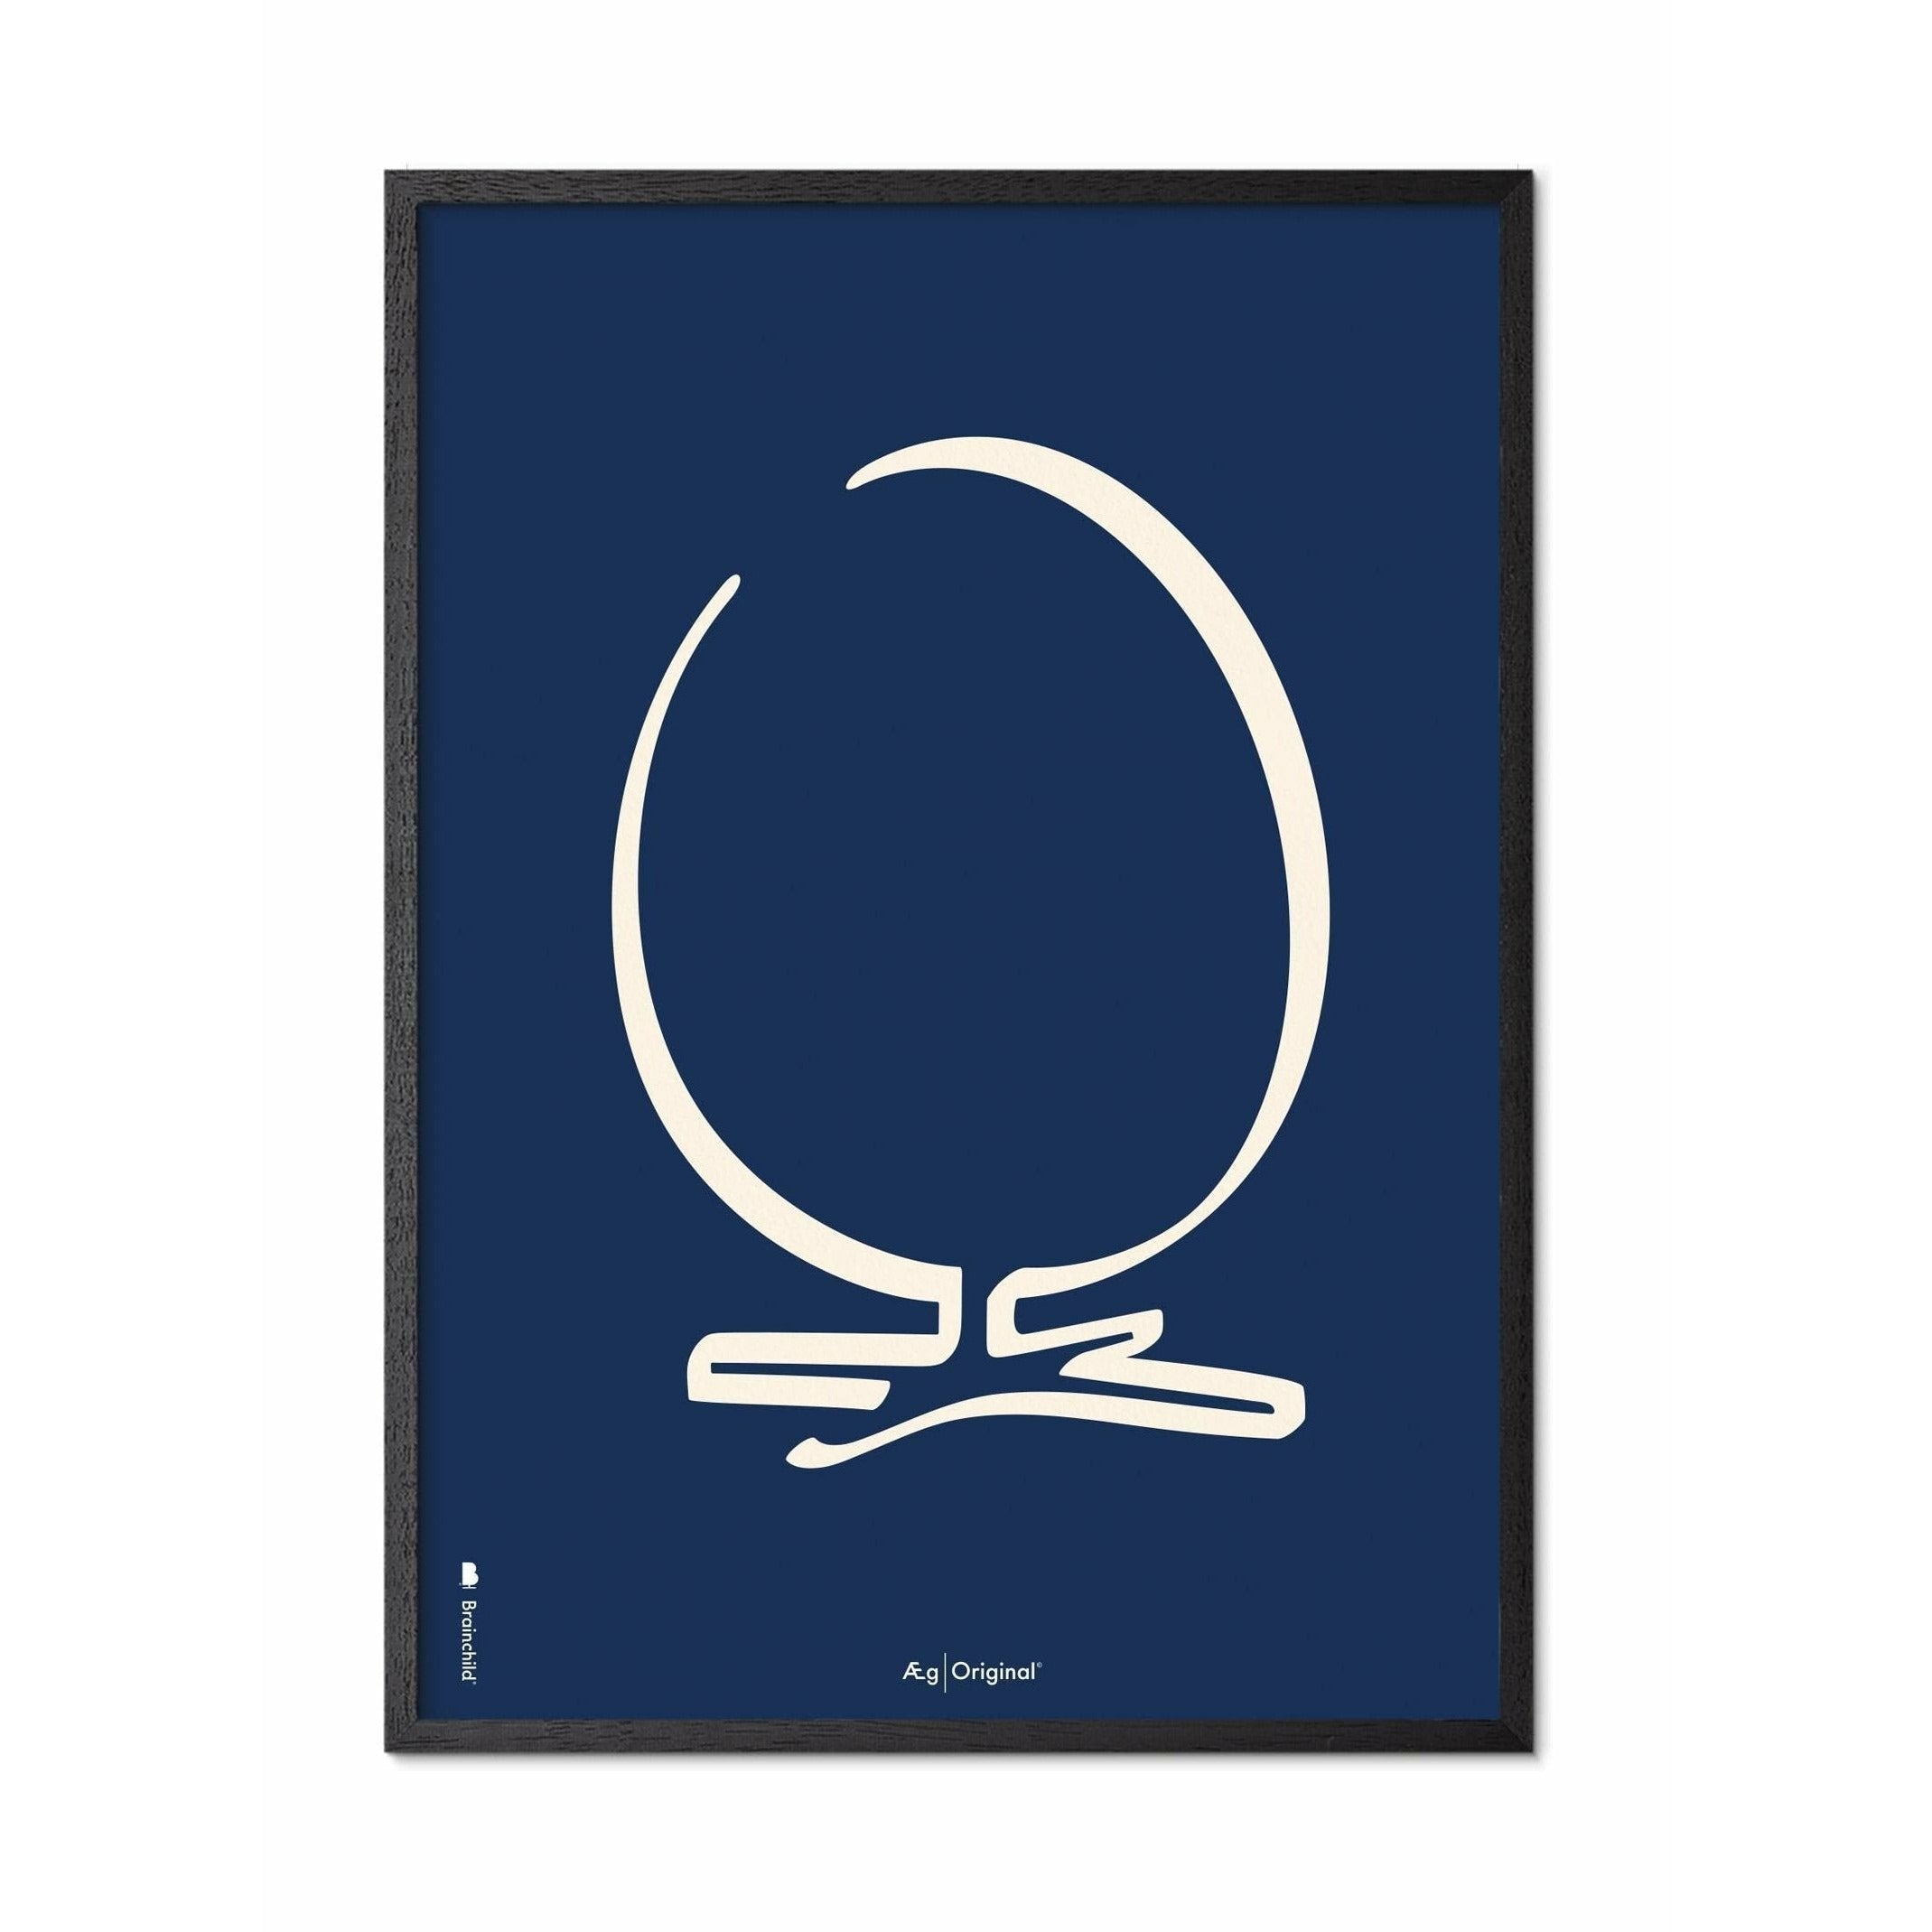 Brainchild Egg Line Poster, Frame In Black Lacquered Wood A5, Blue Background